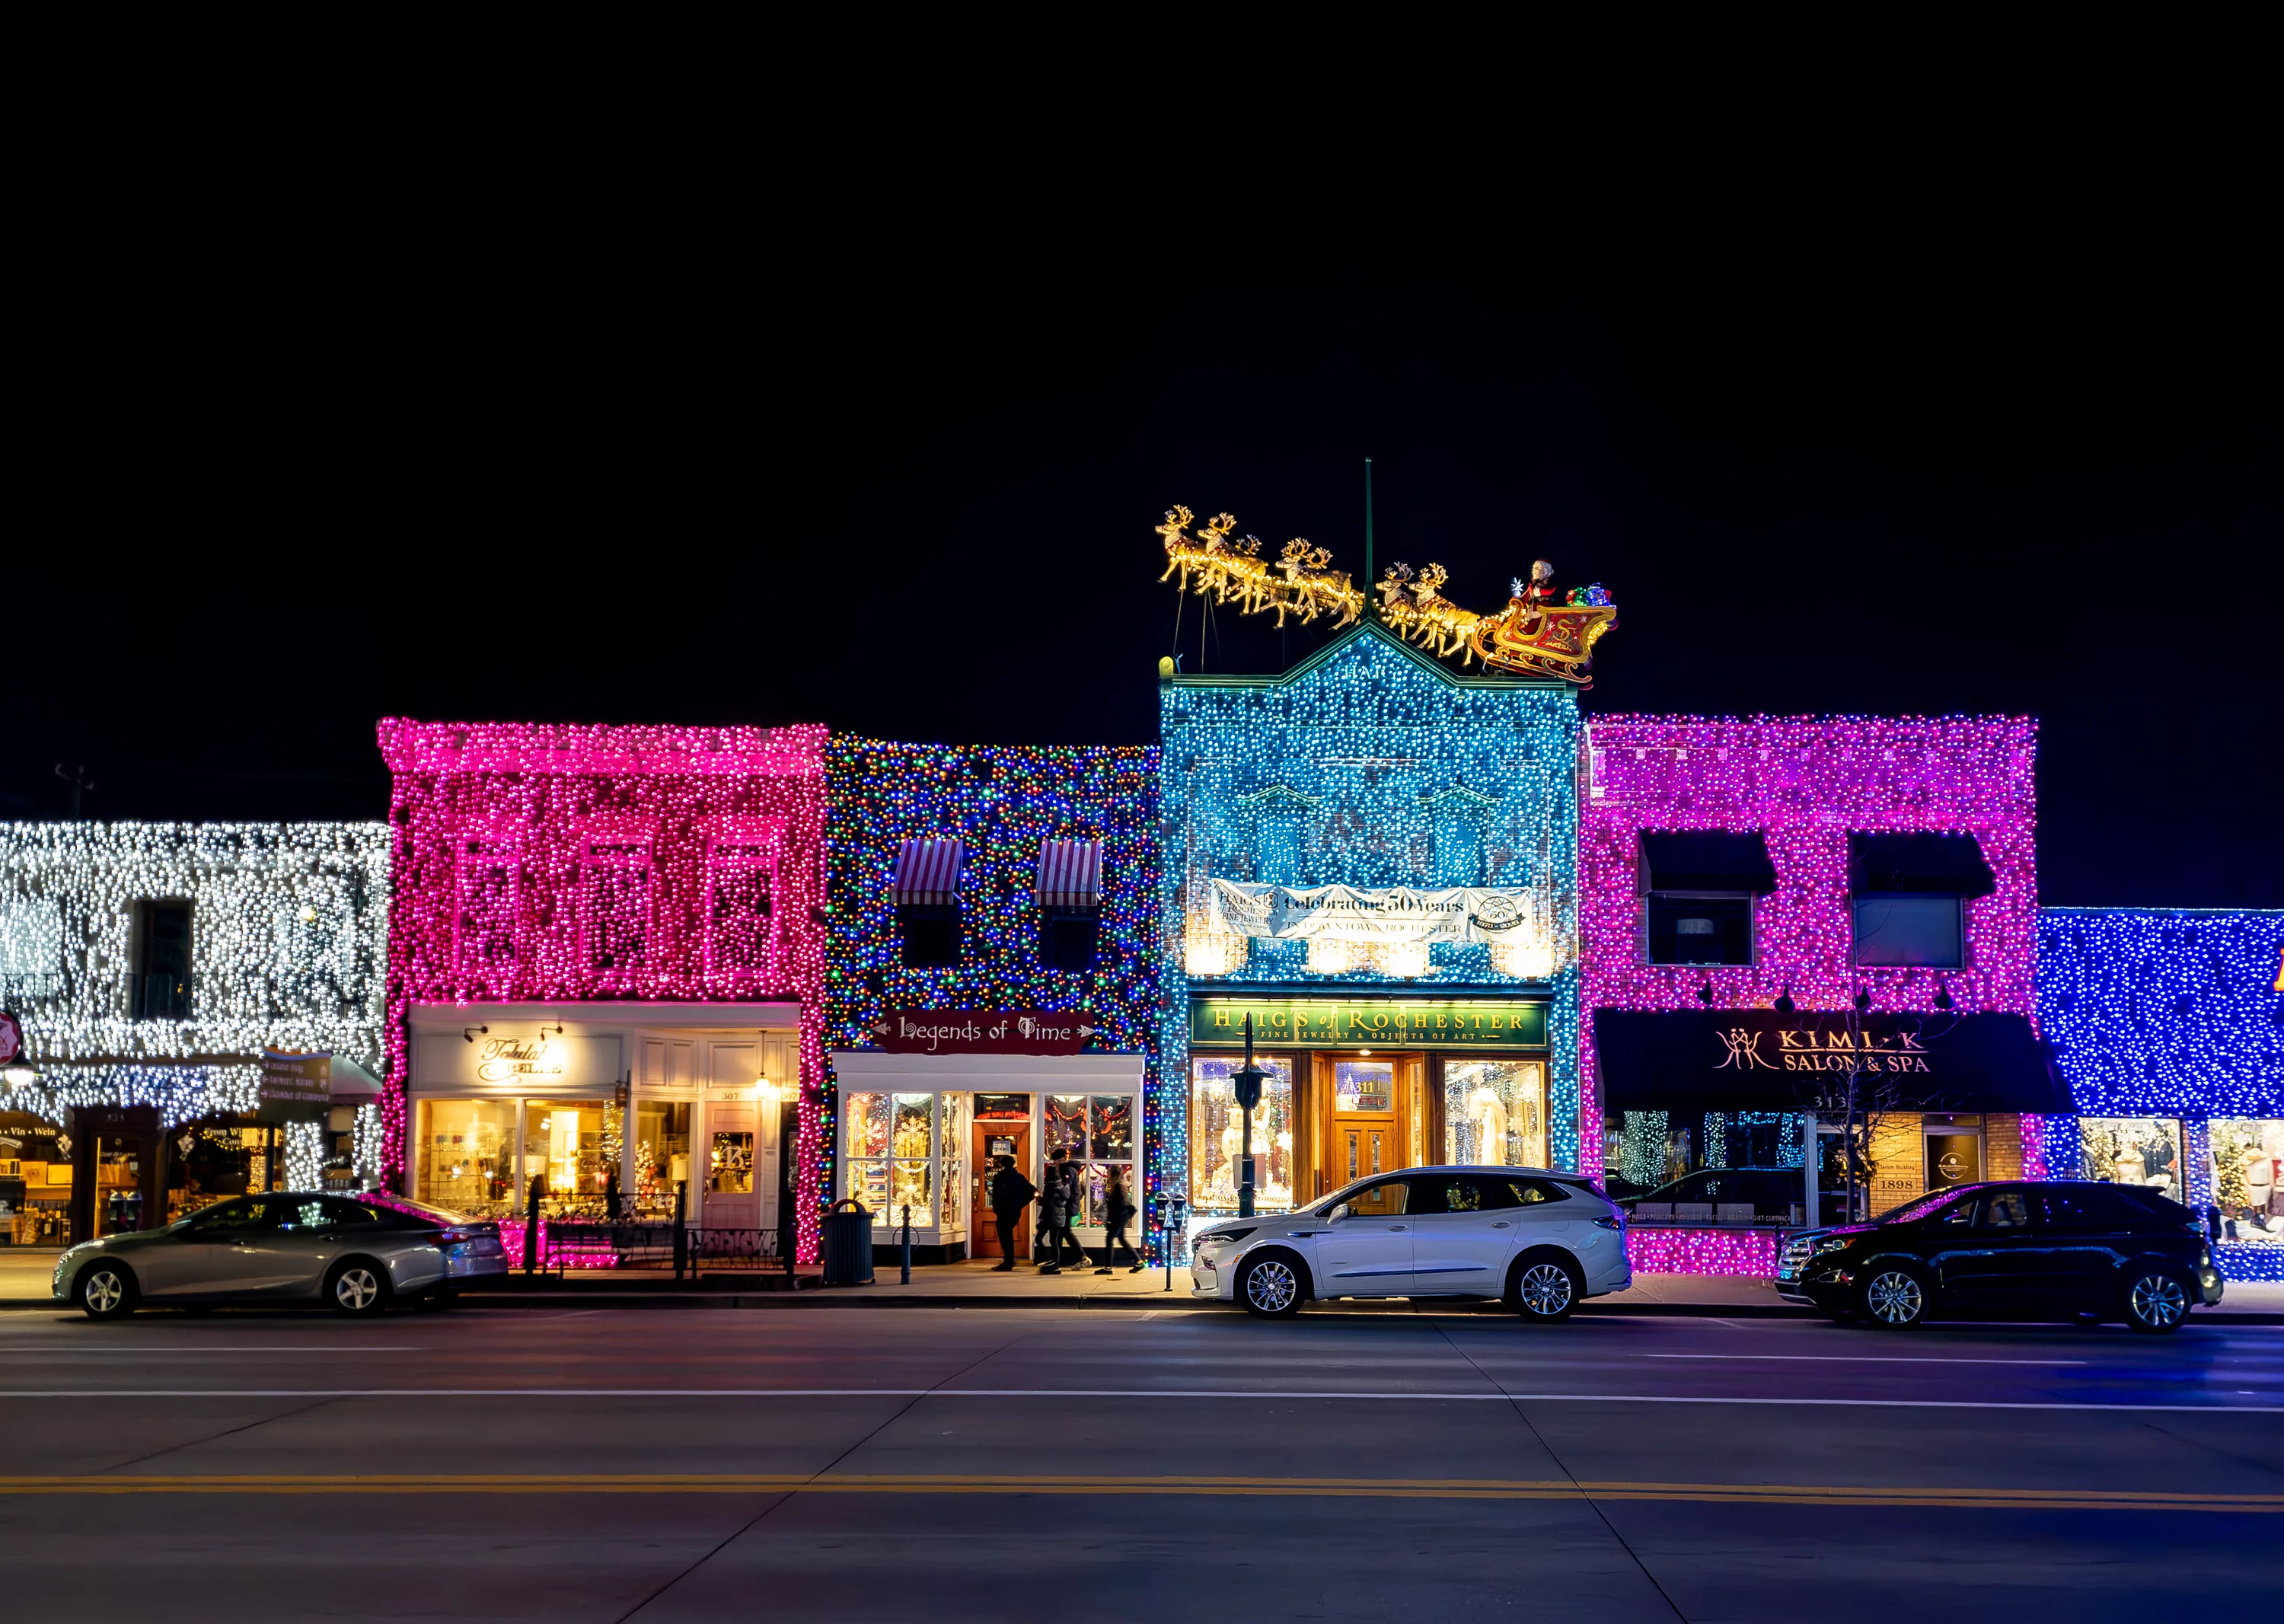 big-bright-light-show-holiday-christmas-lights-on-main-street-rochester-road-in-downtown-rochester-michigan-with-santa-legends-of-time-haigs-of-rochester-kimlk-salon